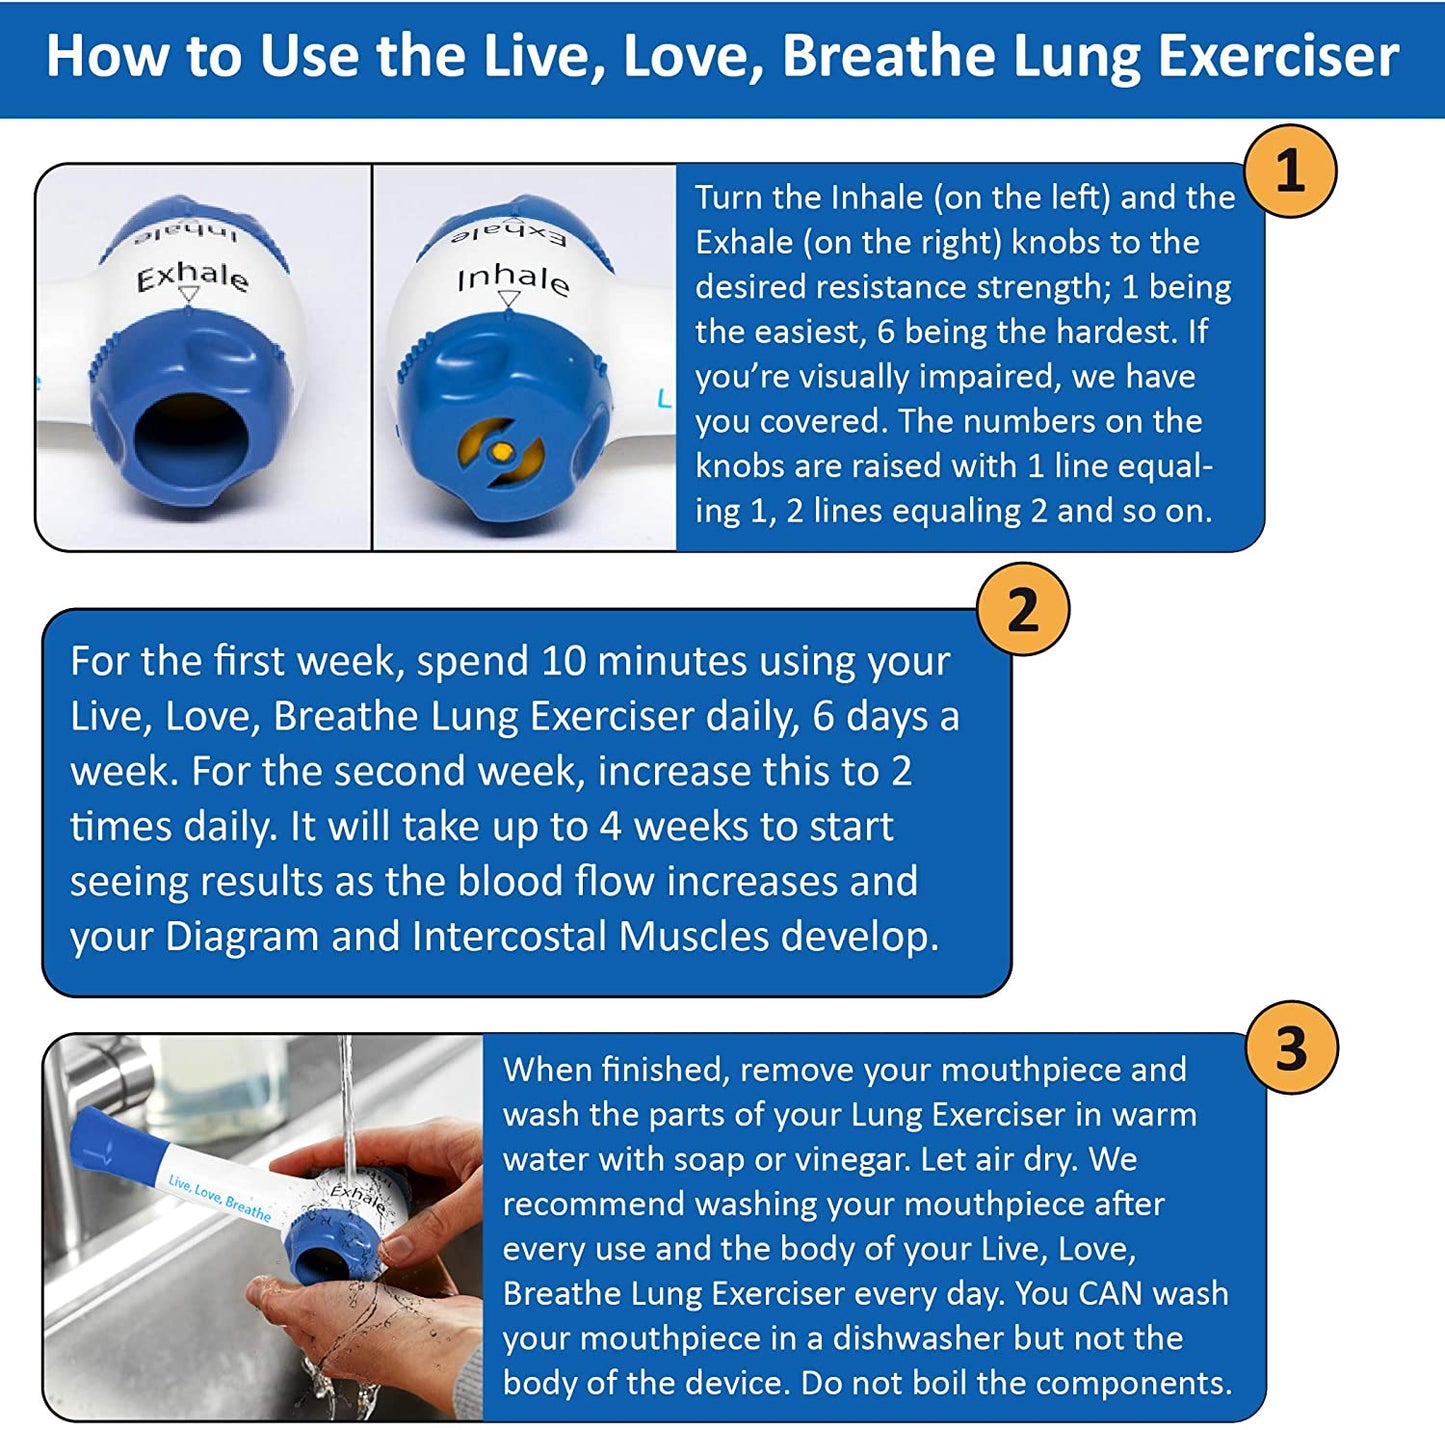 How to use the live love breathe lung exerciser